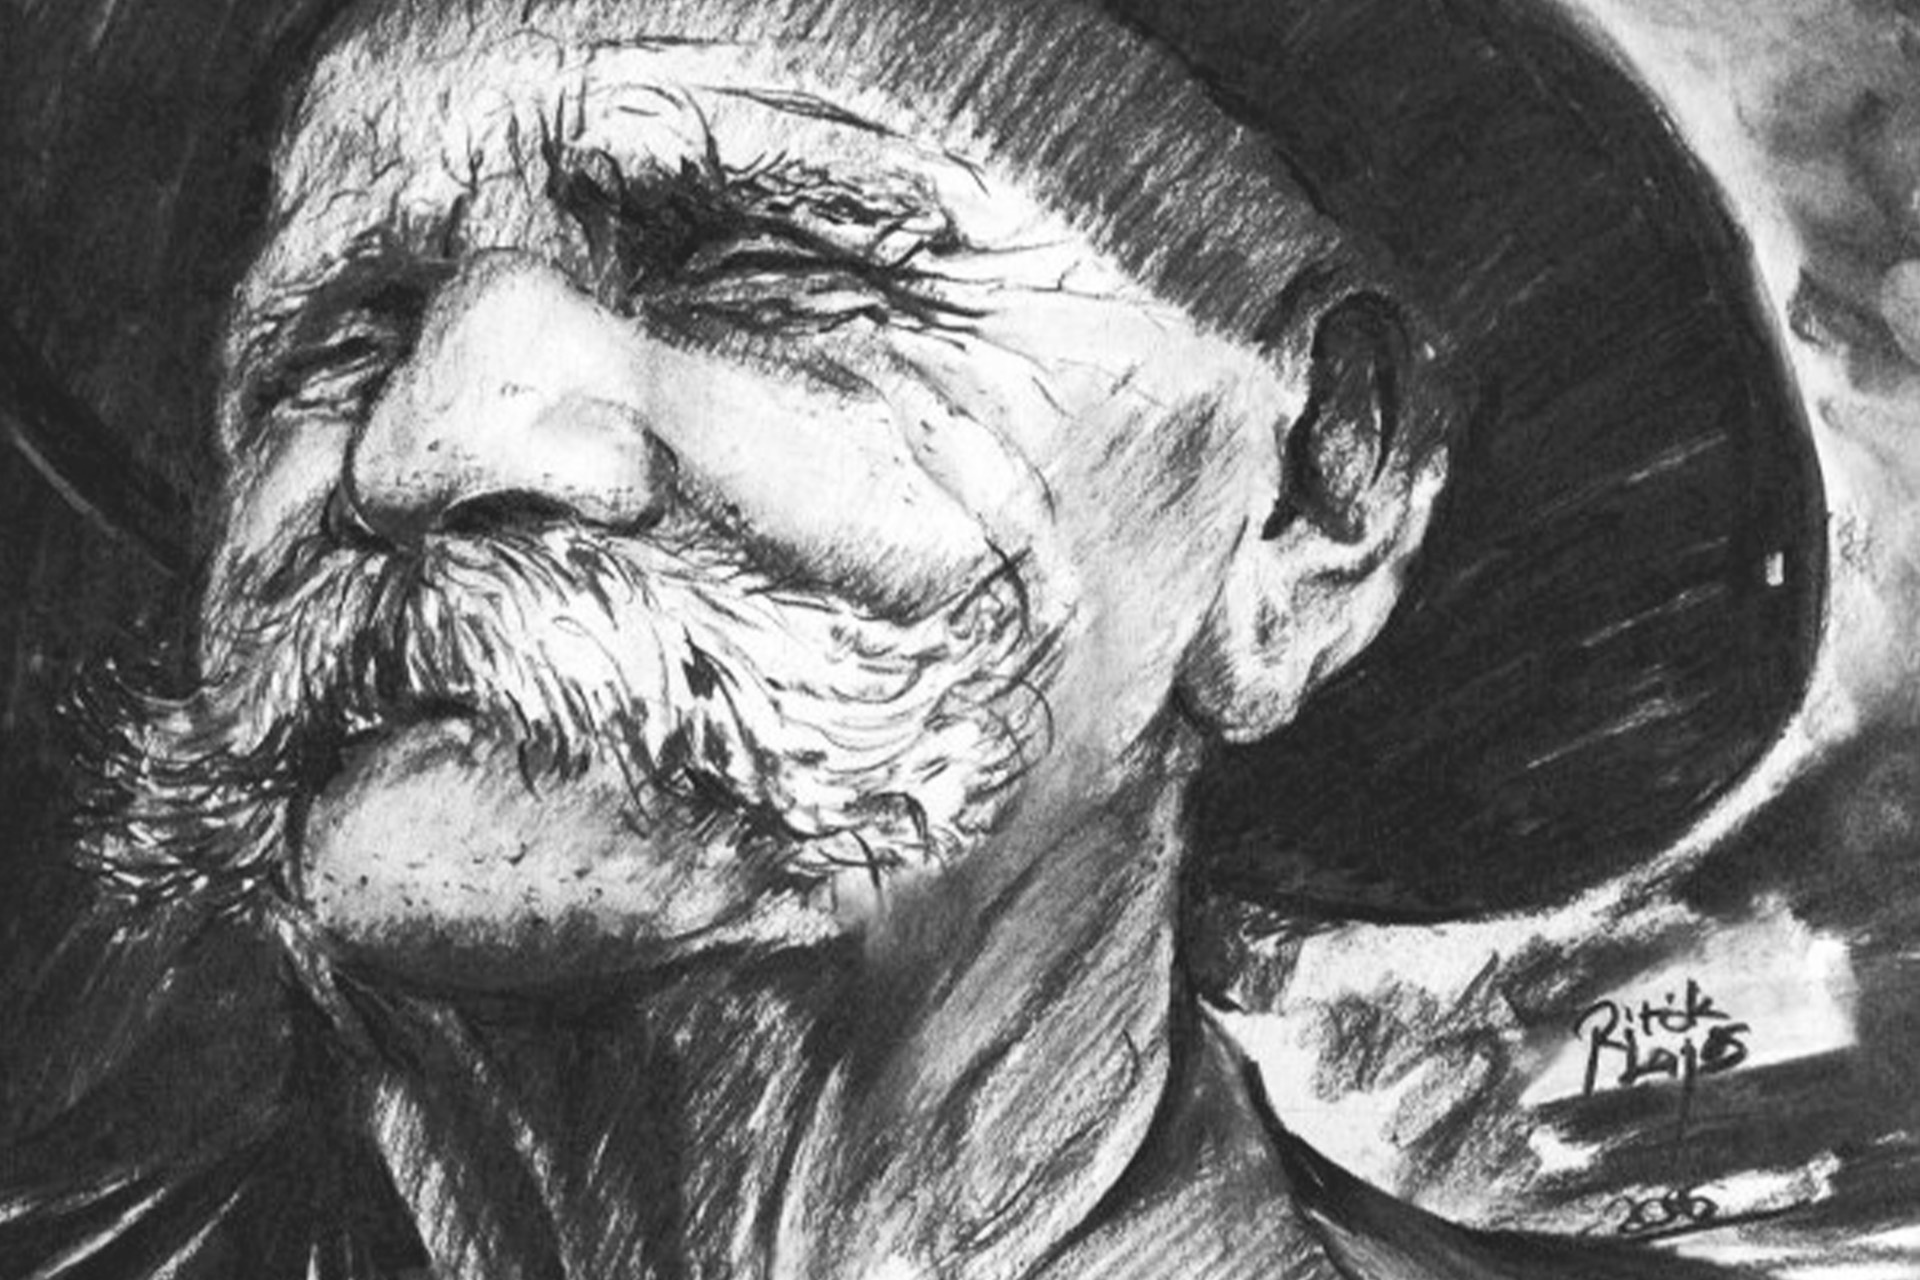 Black and white sketch of an old man with a large moustache and wide brimmed hat